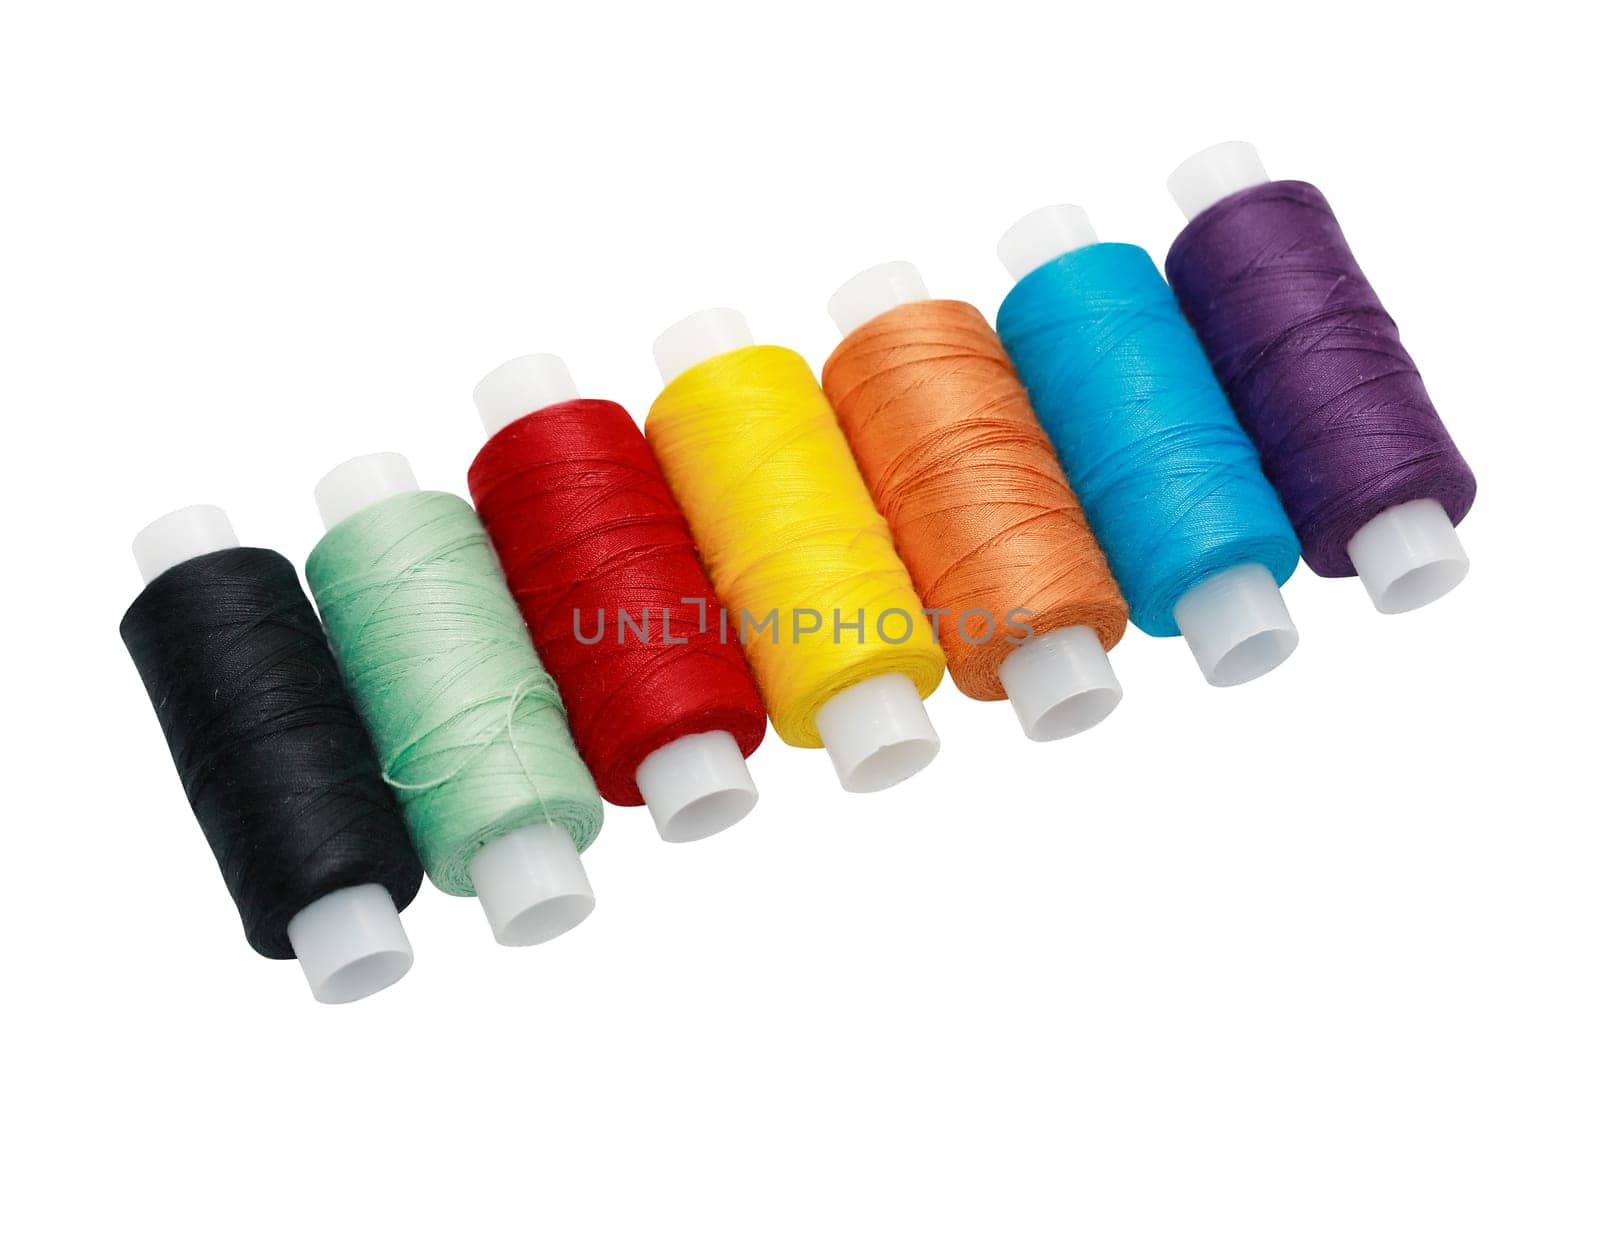 A set of multicolored threads on a white background isolated with clipping path